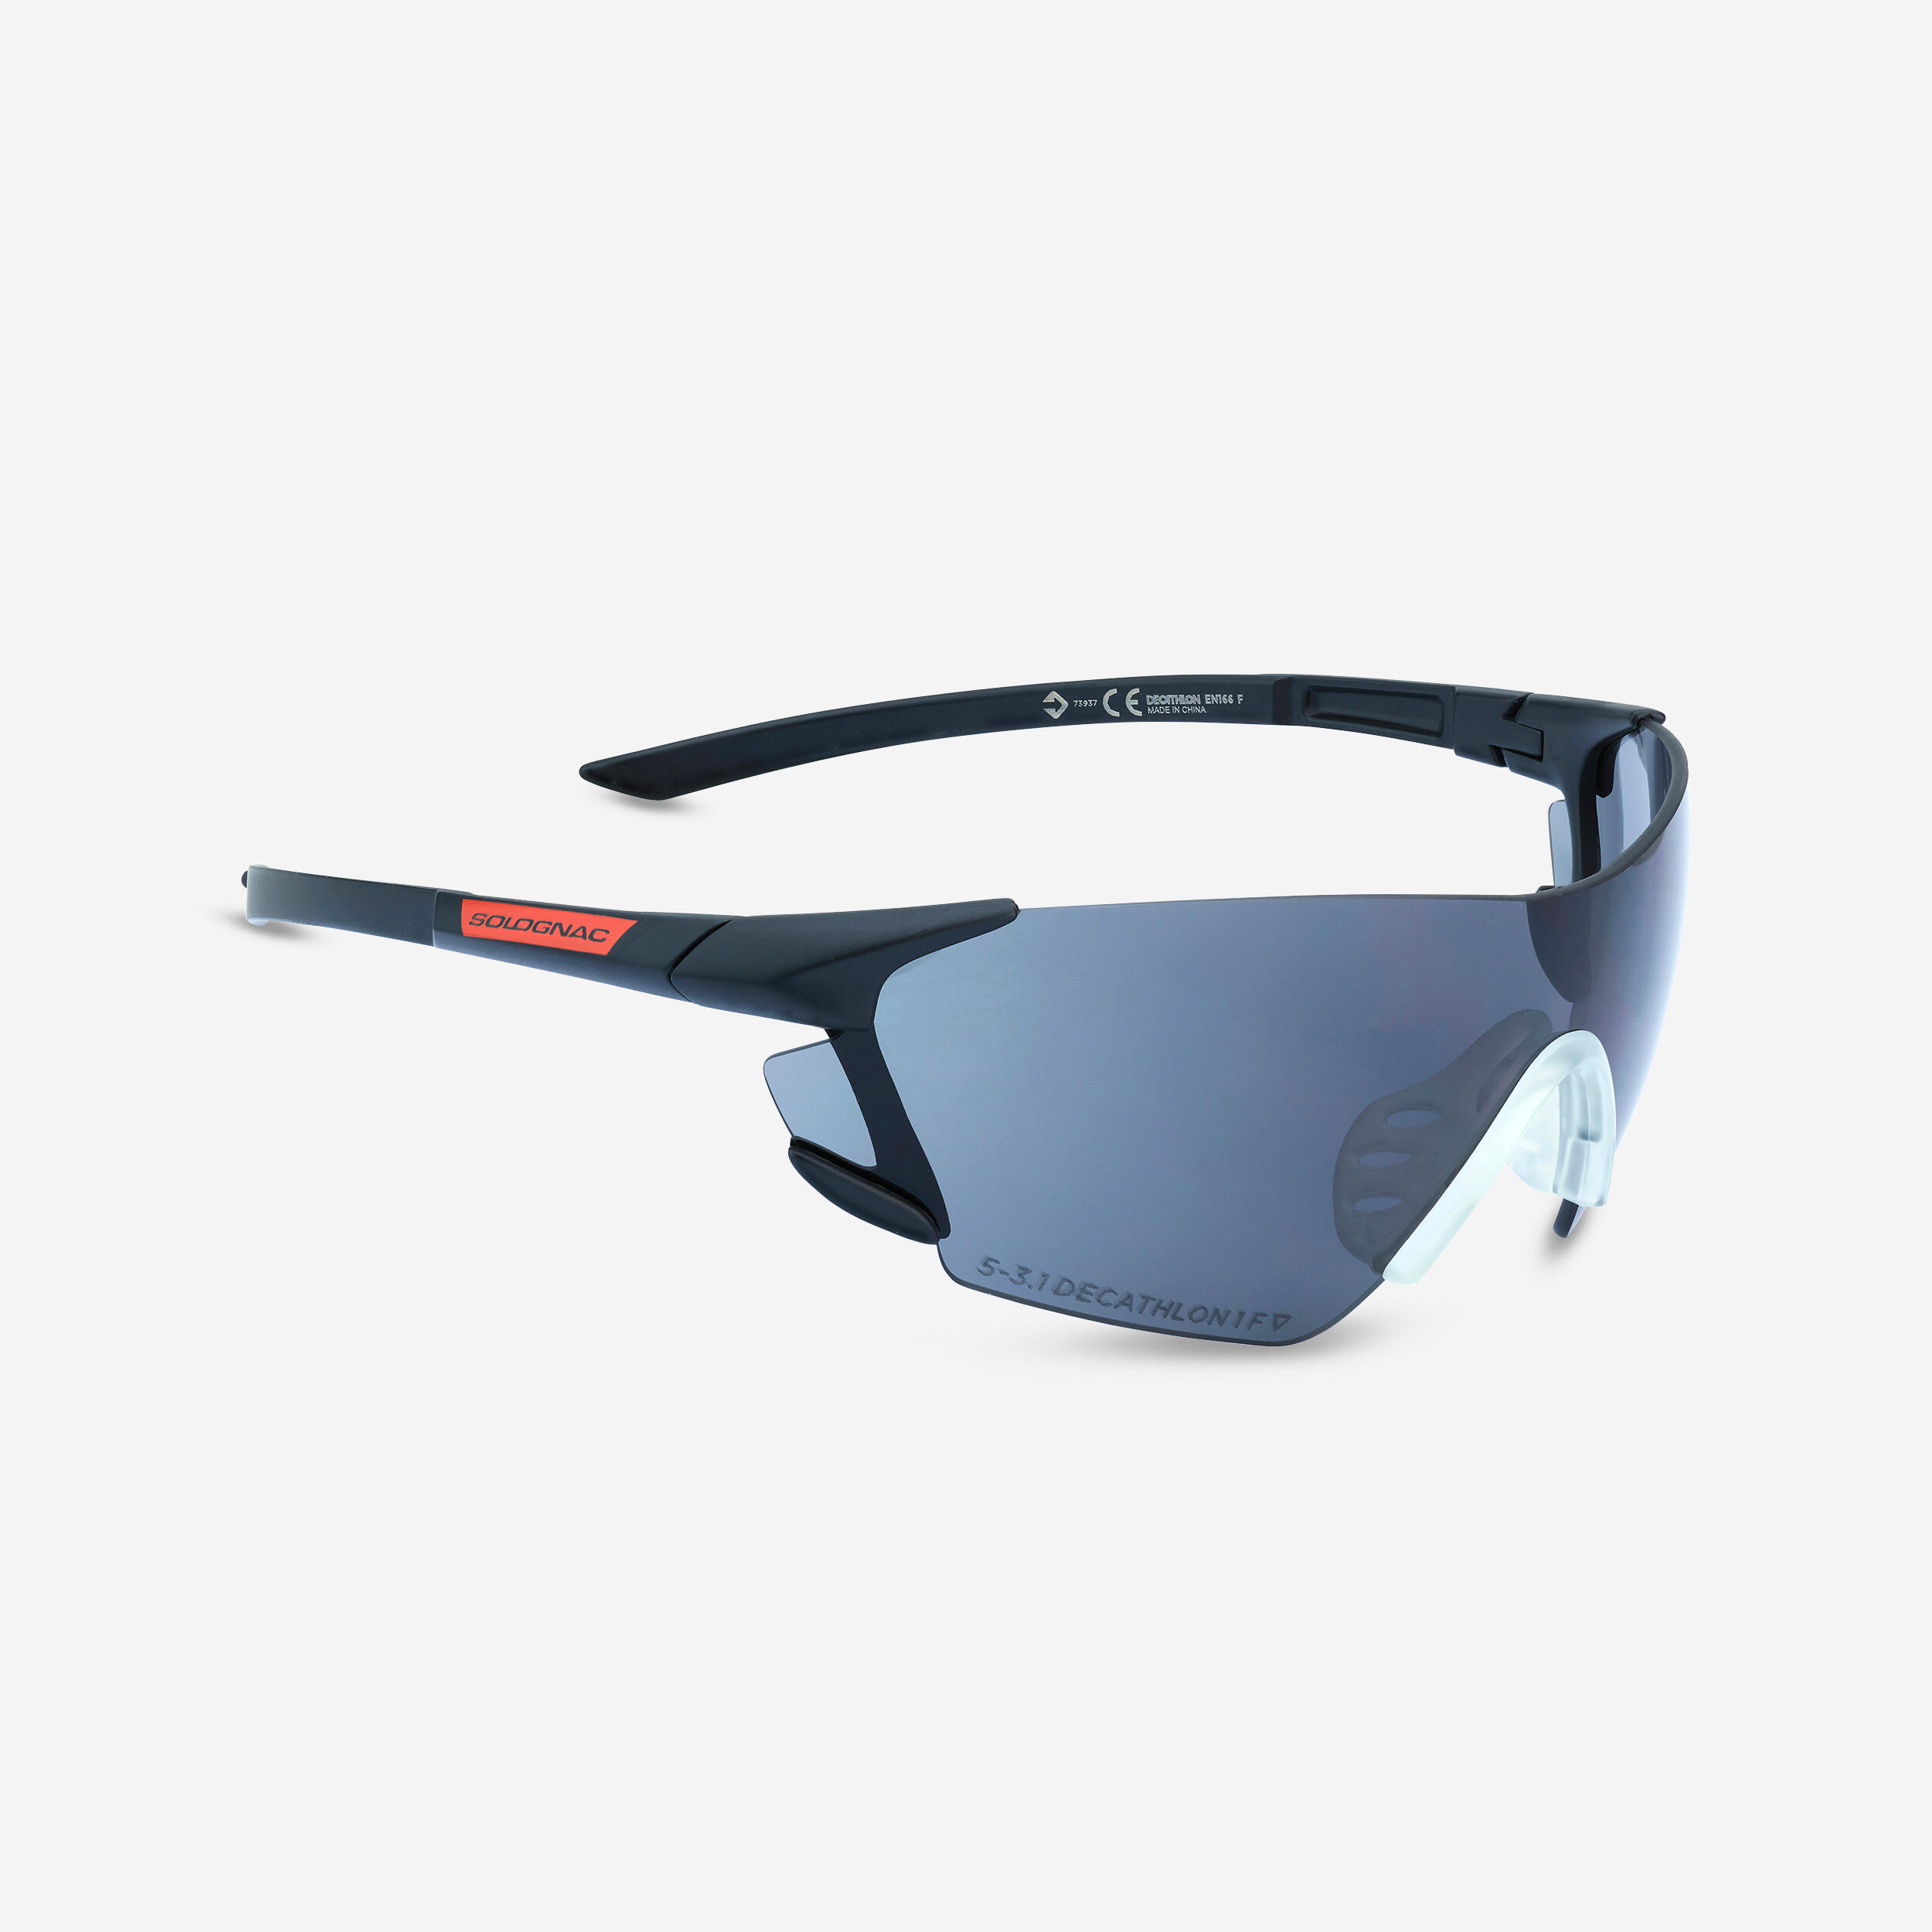 CLAY PIGEON SHOOTING PROTECTIVE GLASSES 100, STRONG SUNGLASS LENSES, CATEGORY 3 1/5